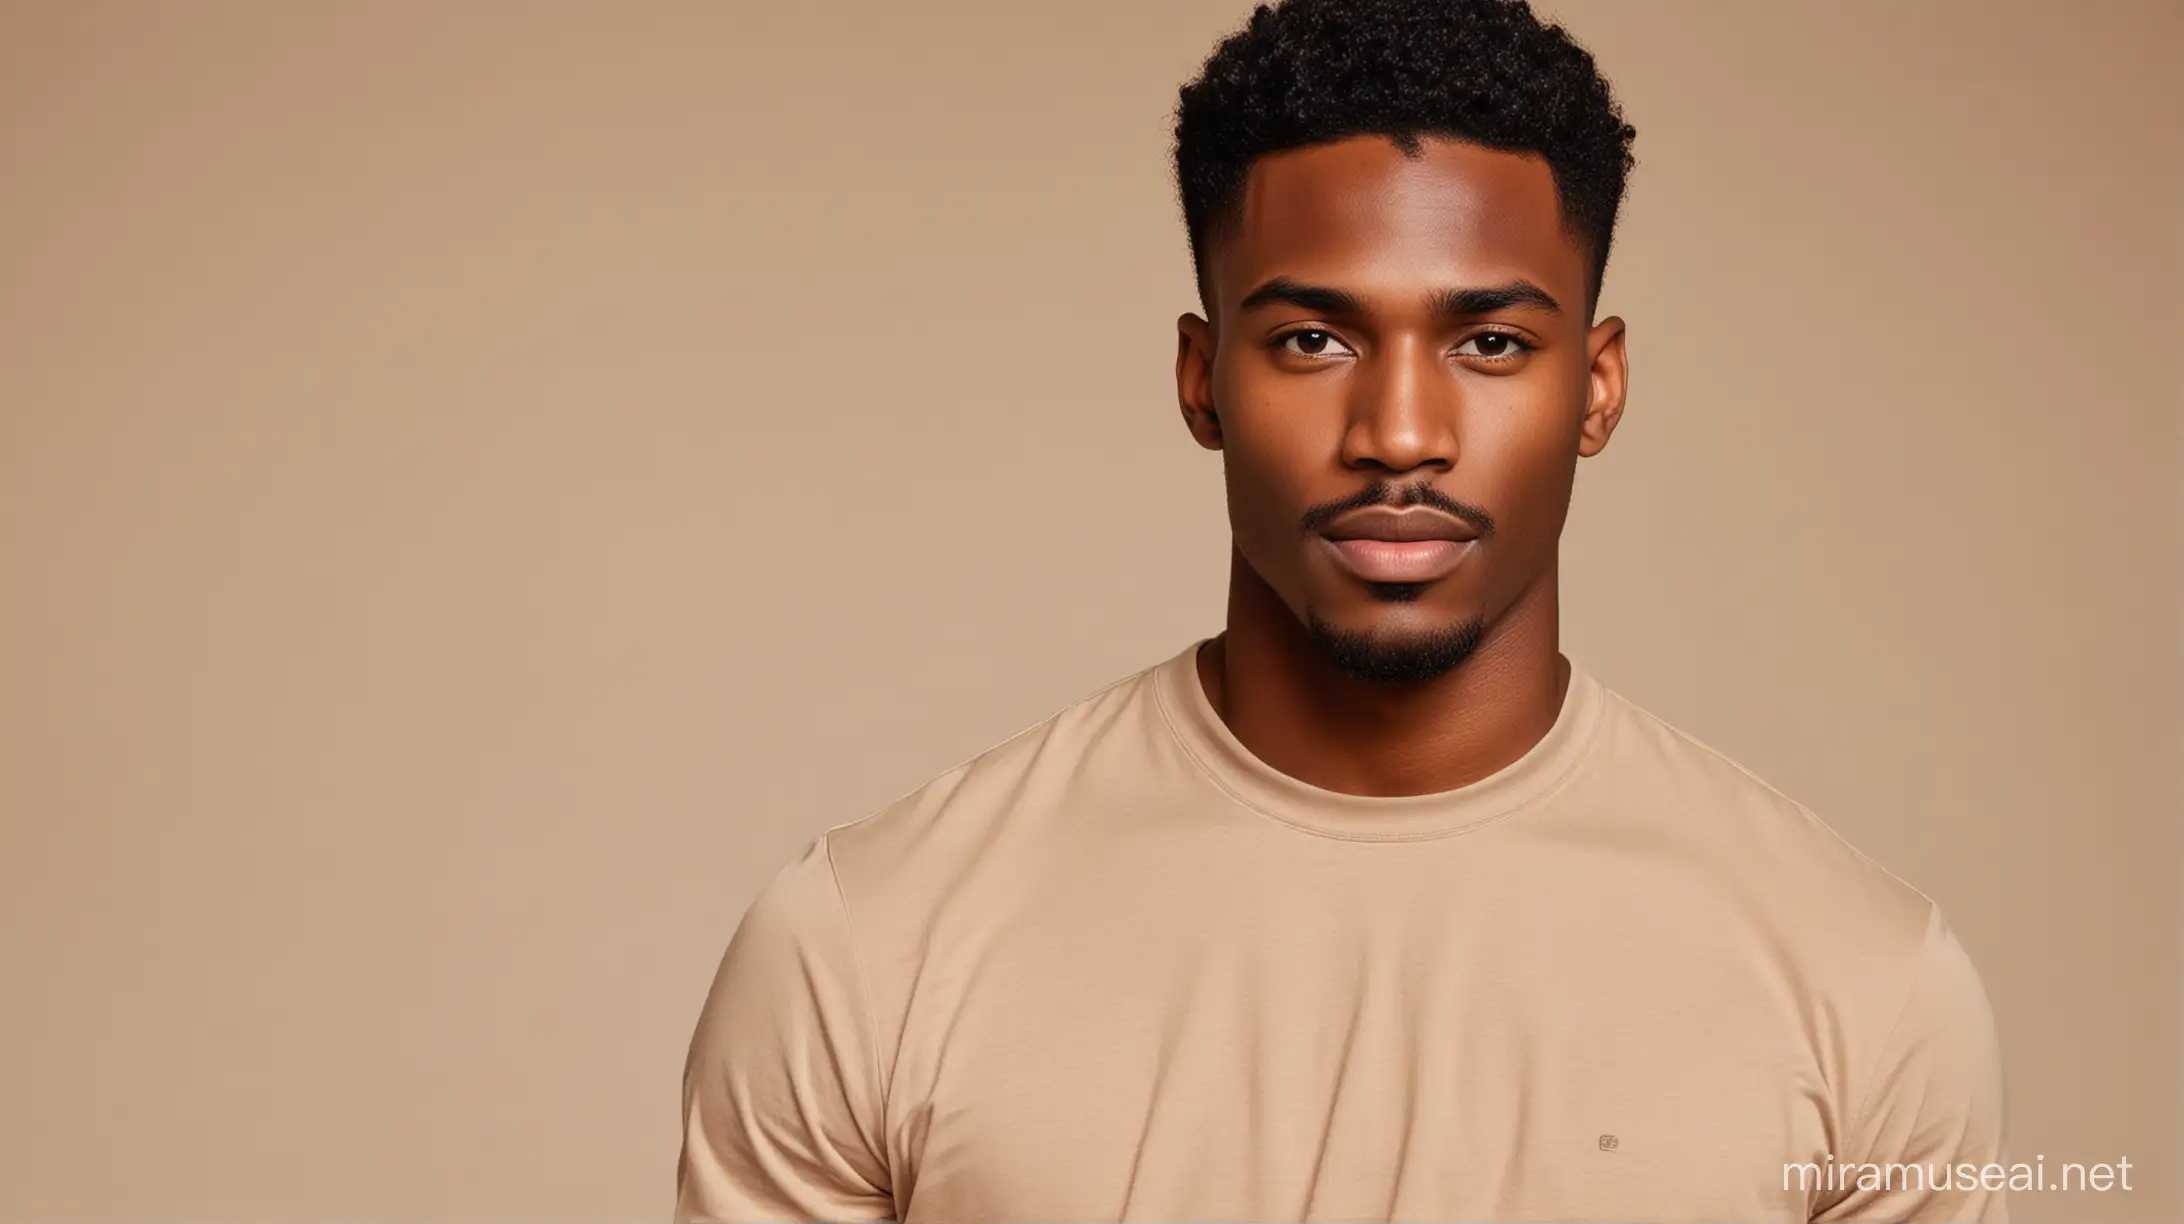 Confident Black Man Model with Waves in Tan TShirt